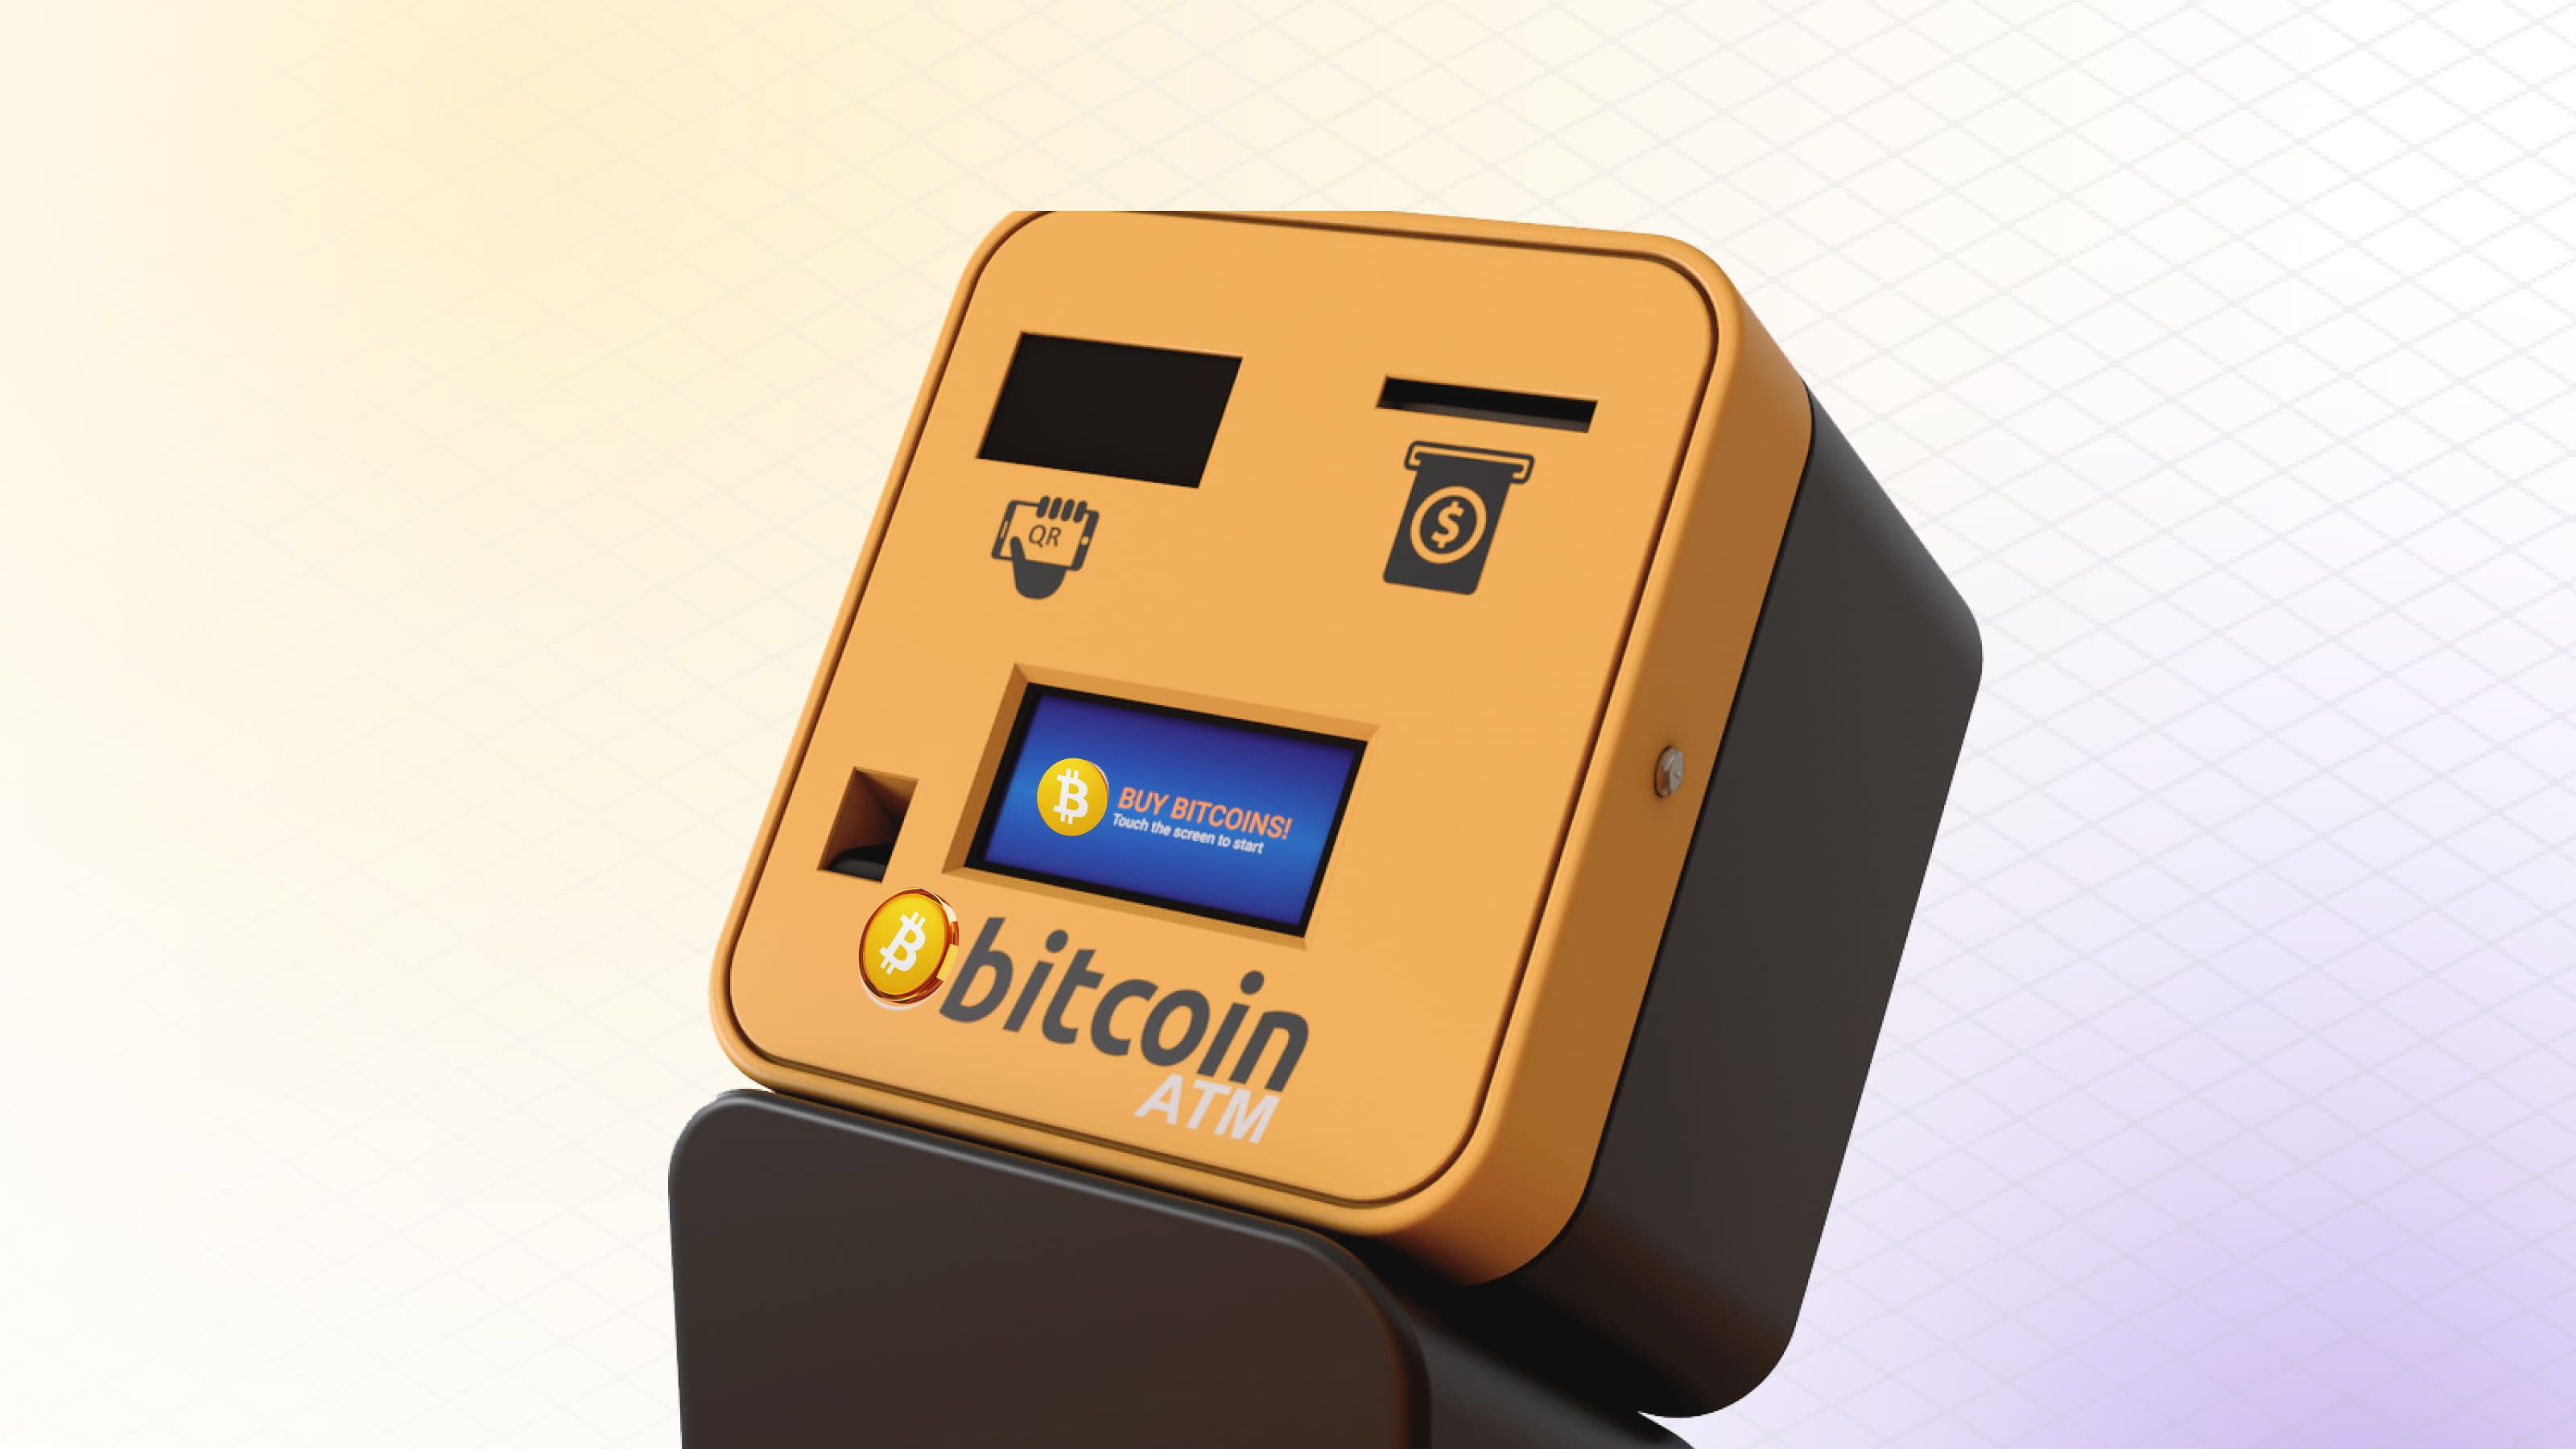 Cryptocurrency s can be bought from cryptocurrency ATMs, P2P platforms, exchanges and OTC services.